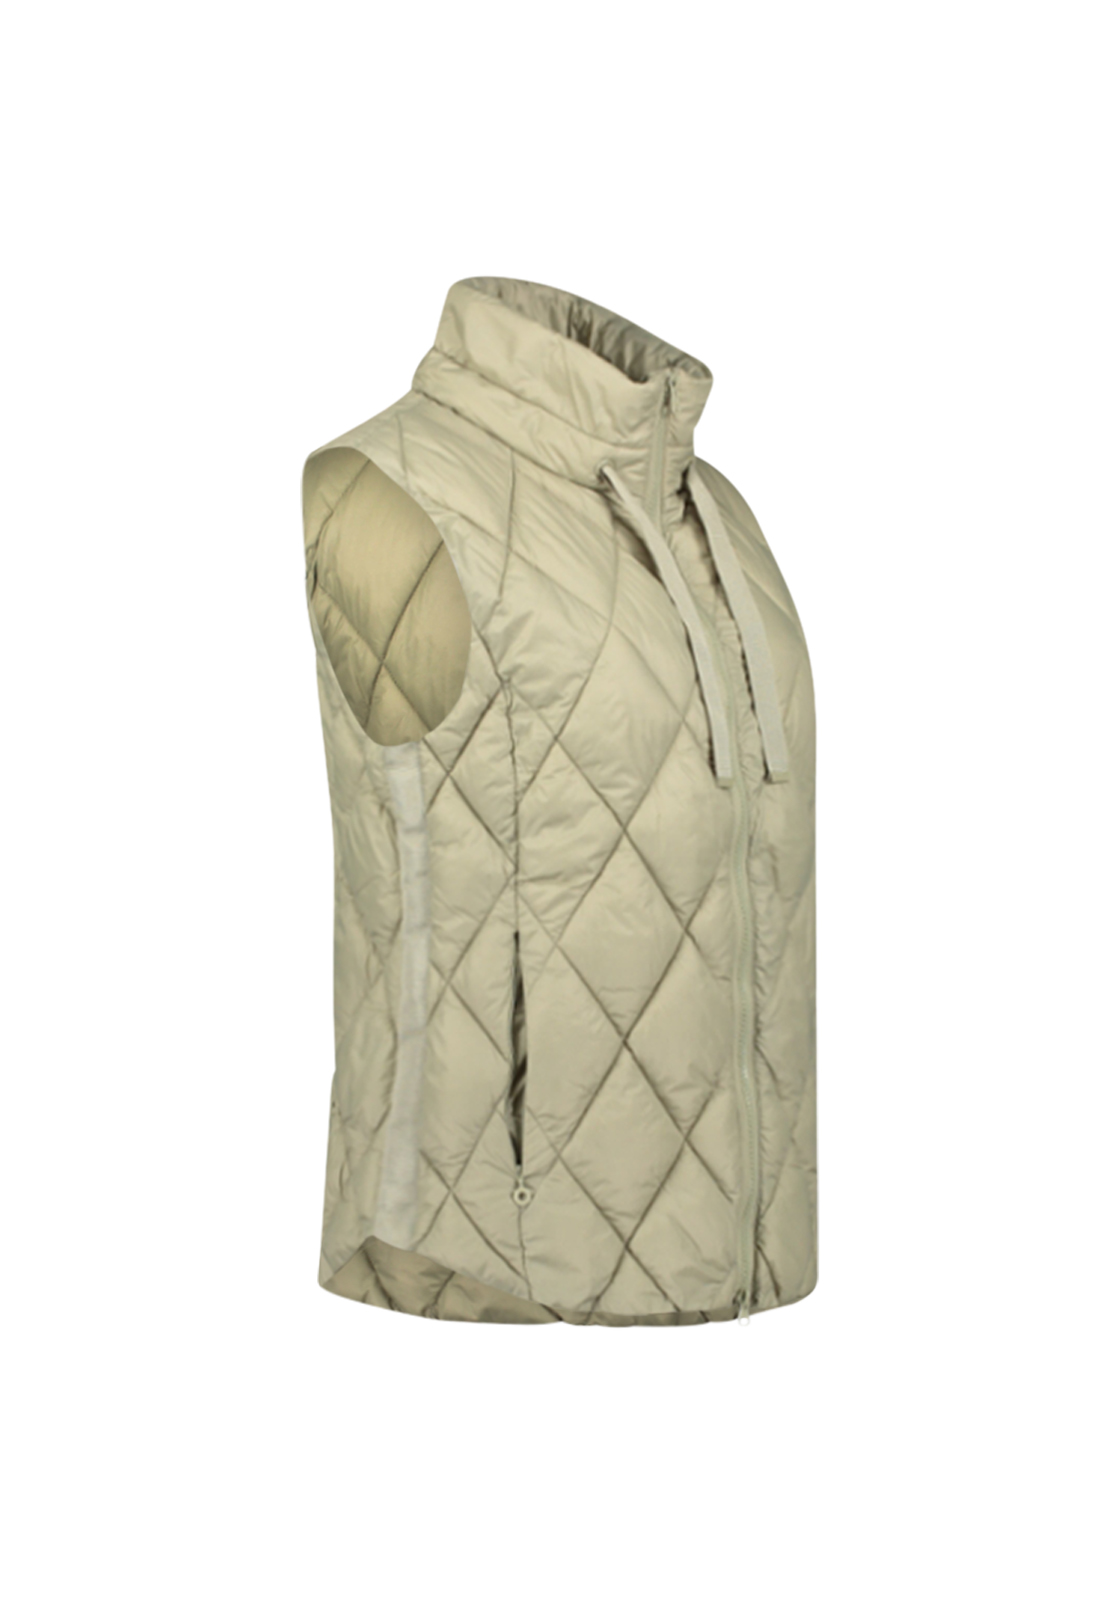 SuZa 8030-Quilted Waistcoat Dune Grass